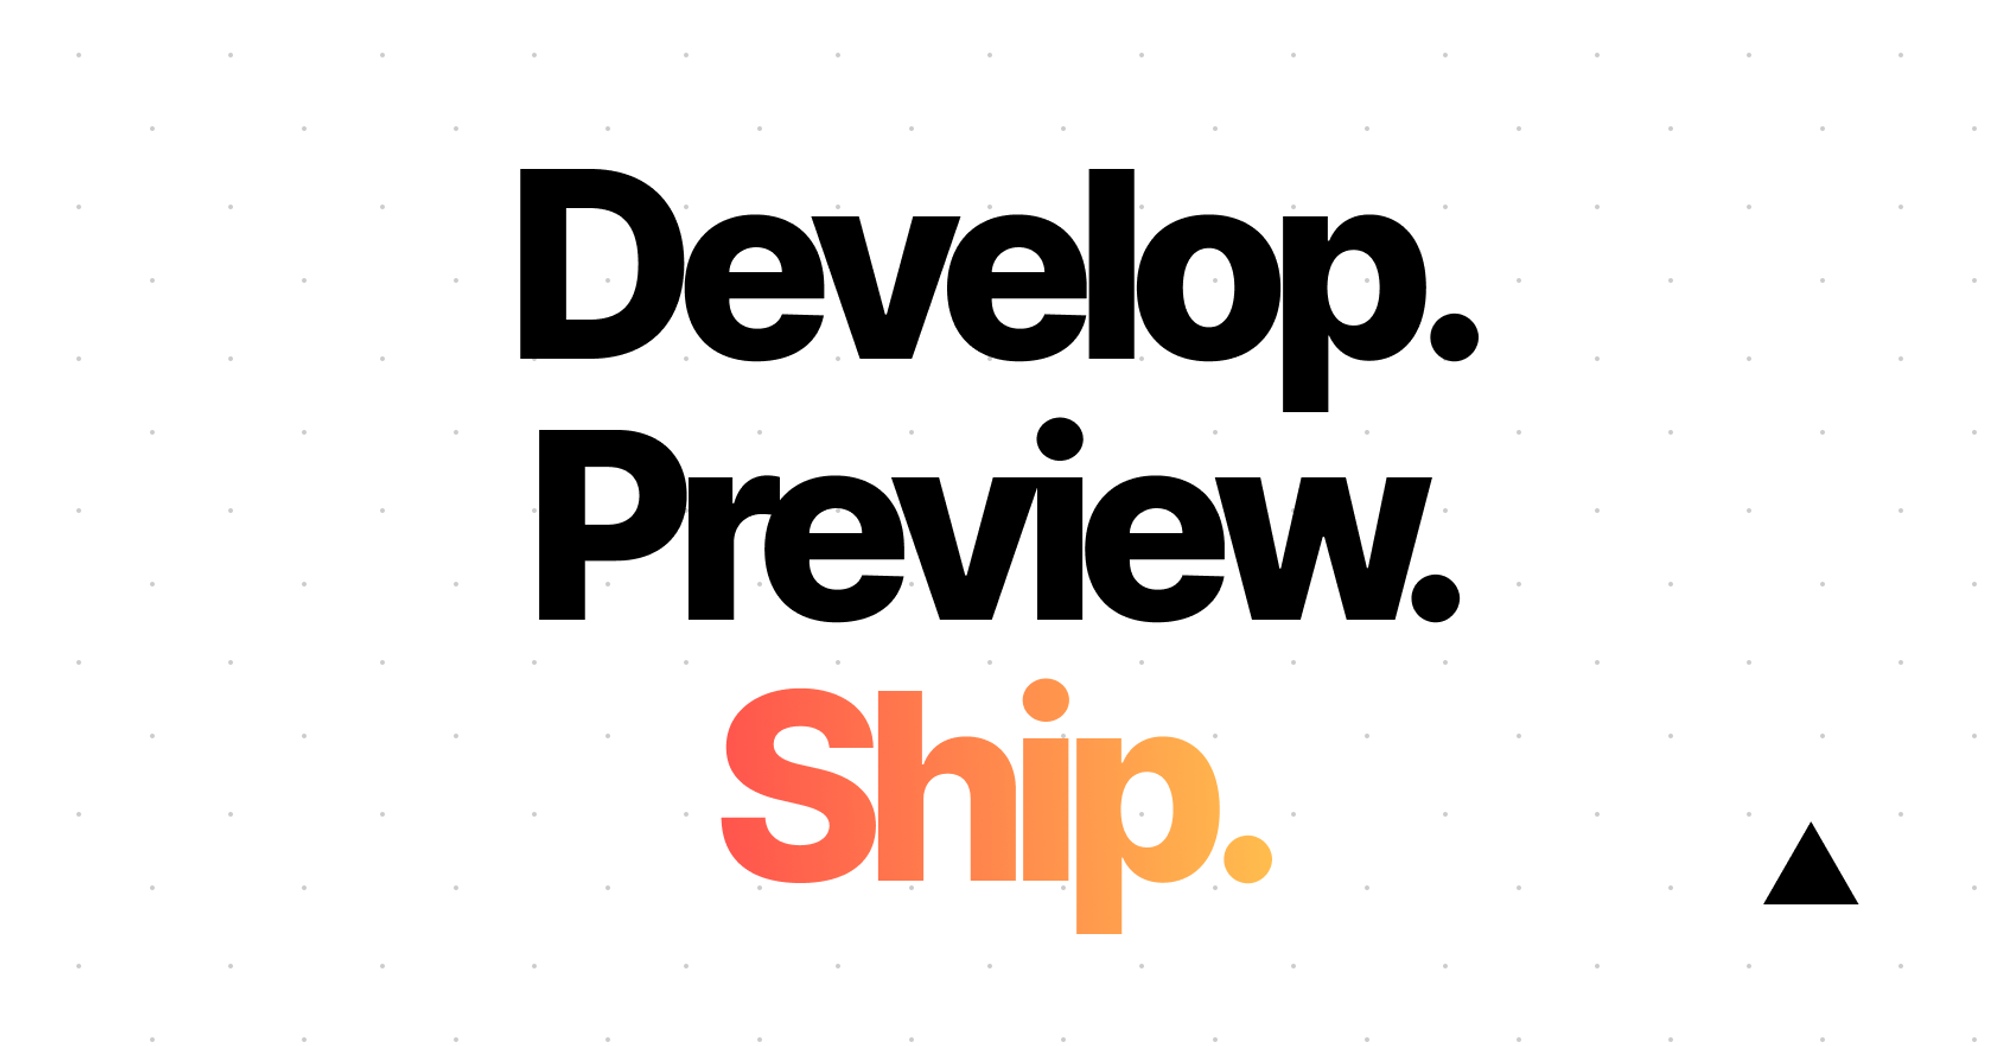 Develop. Preview. Ship. For the best frontend teams - Vercel